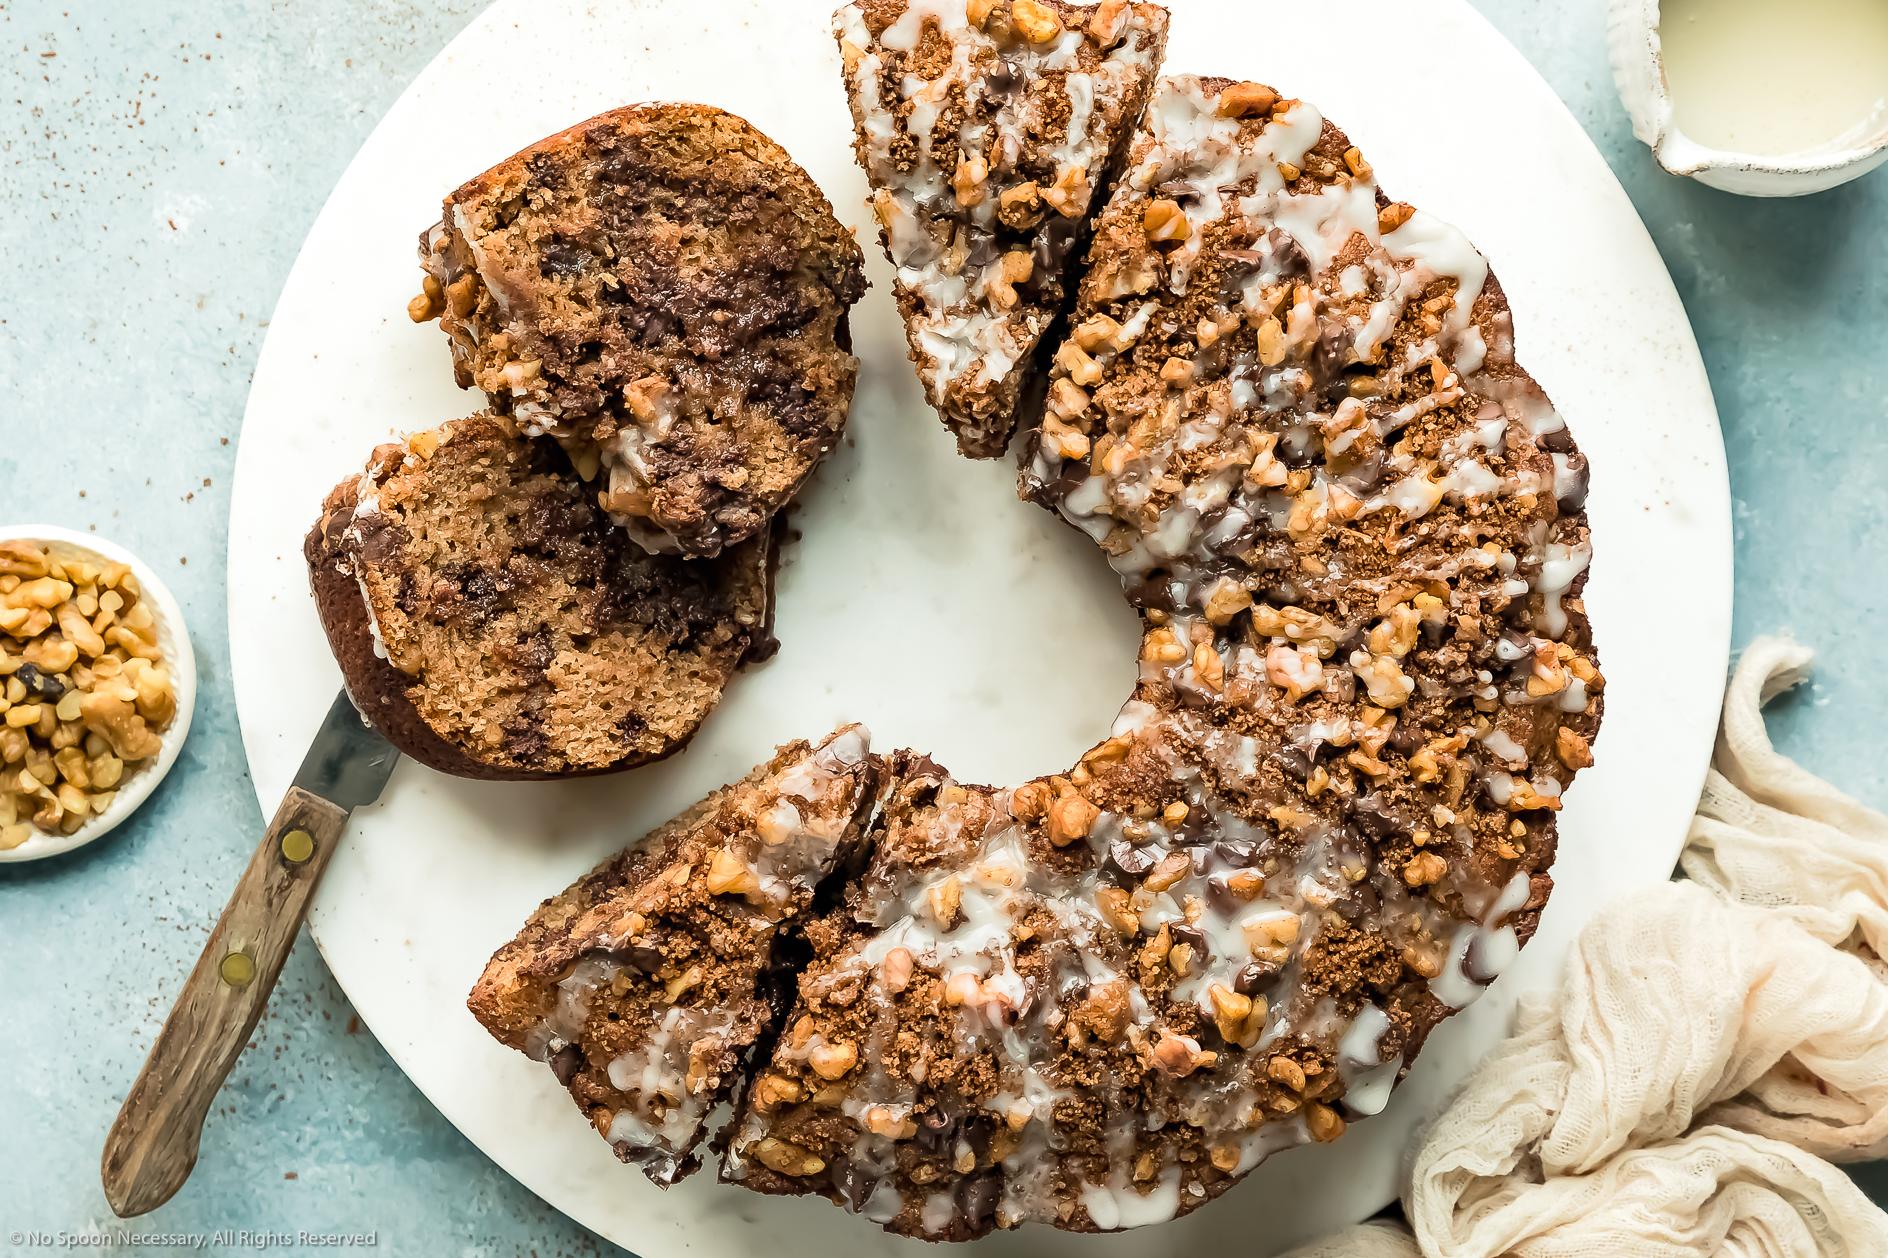  Start your day off on a sweet note with this yummy coffee cake.